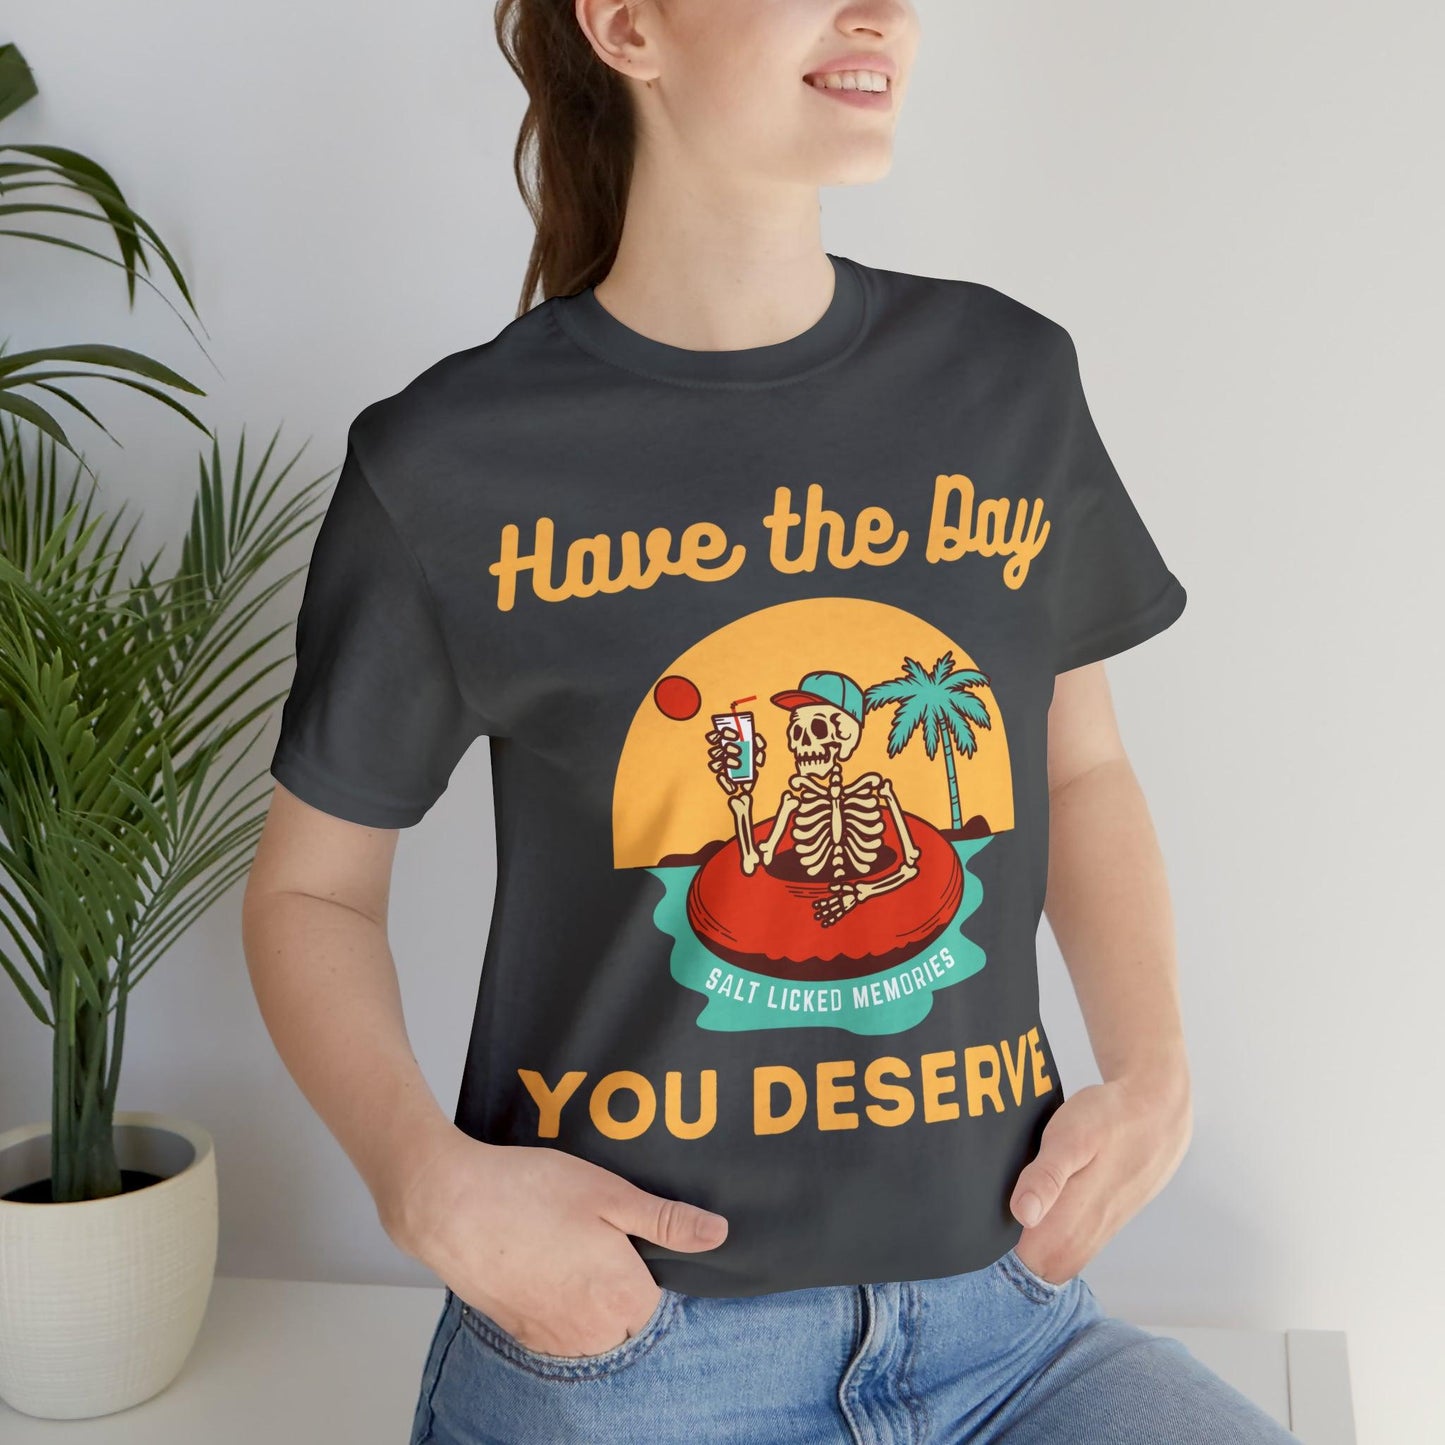 Have the Day You Deserve Shirt, Inspirational Graphic Tee, Motivational Tee, Positive Vibes Shirt, Trendy shirt and Eye Catching shirt - Giftsmojo